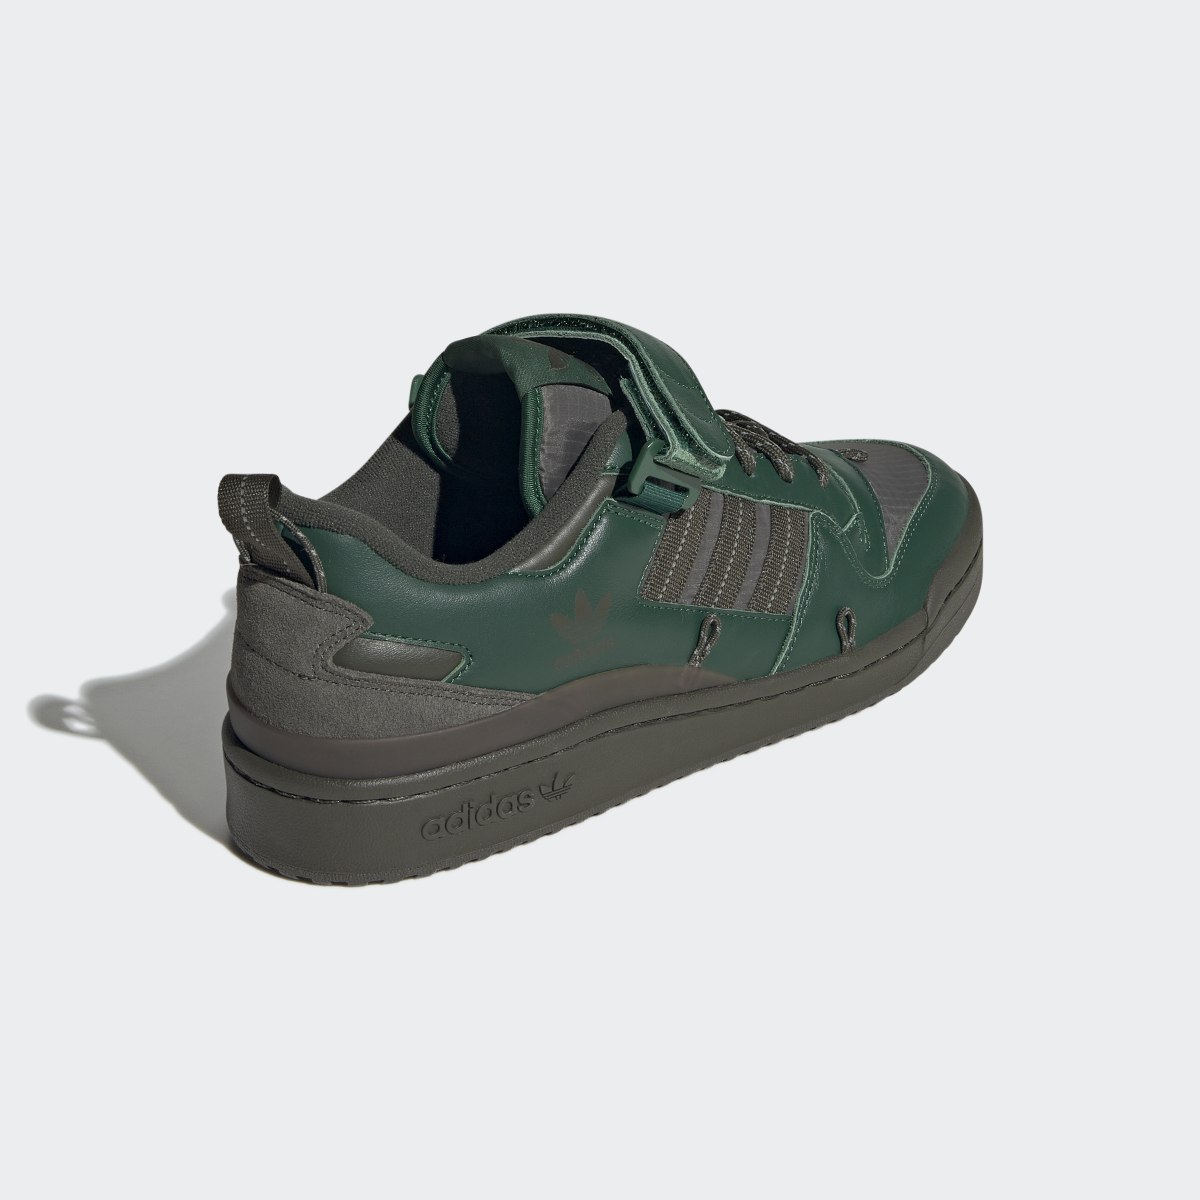 Adidas Forum 84 Camp Low Shoes. 8